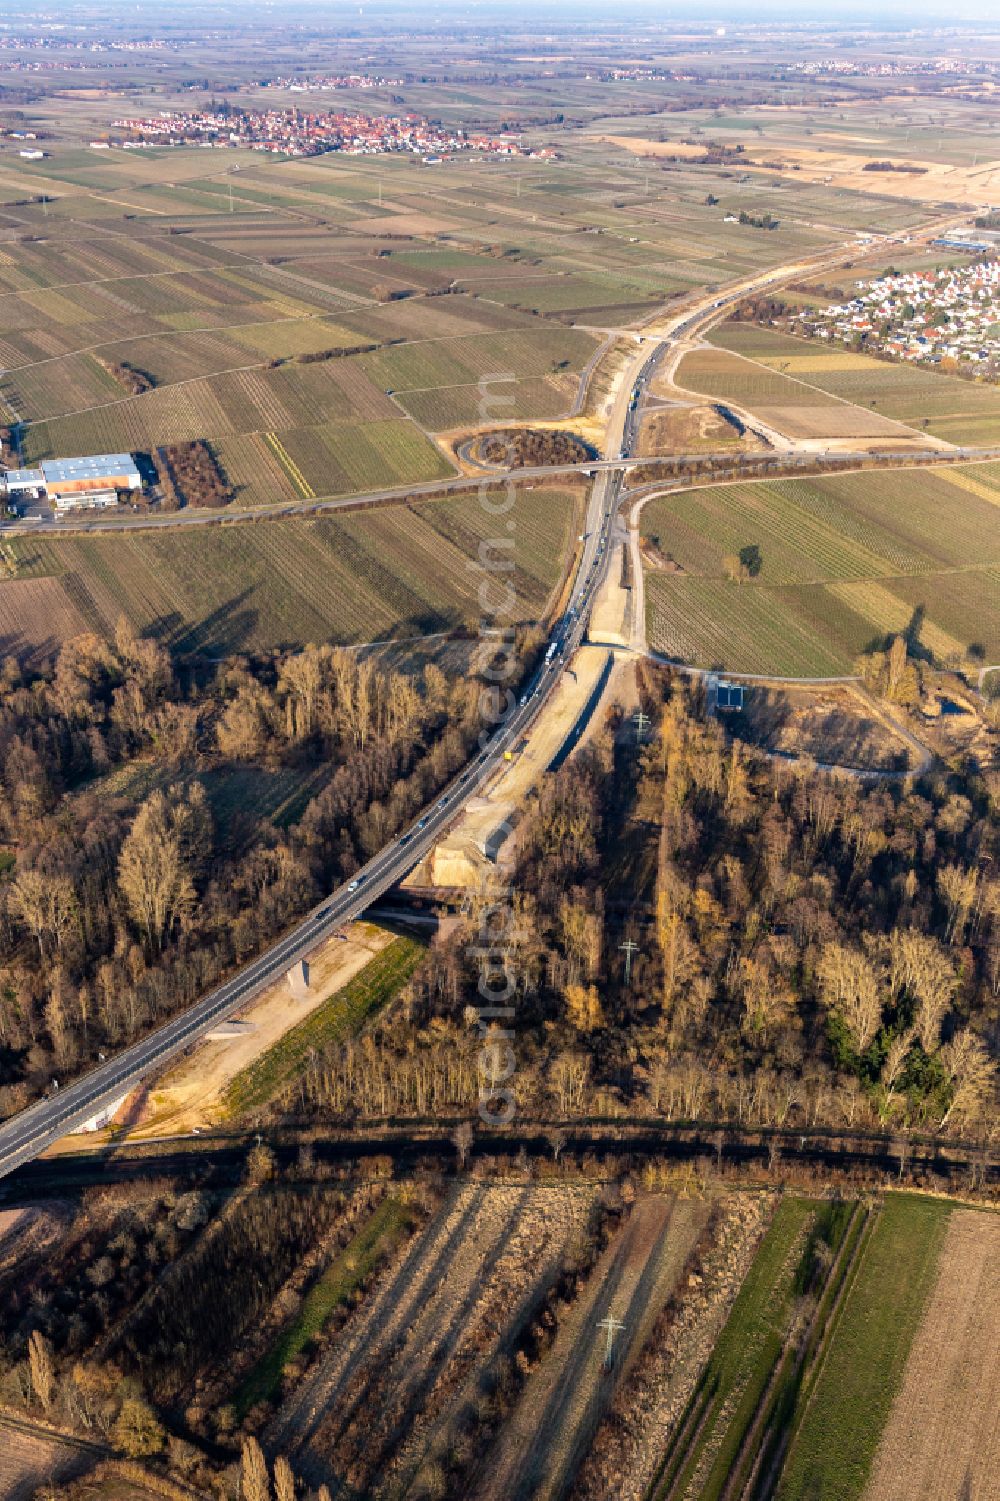 Landau in der Pfalz from above - Construction site of four lanes routing during the exit federal highway B10 in Landau in der Pfalz in the state Rhineland-Palatinate, Germany